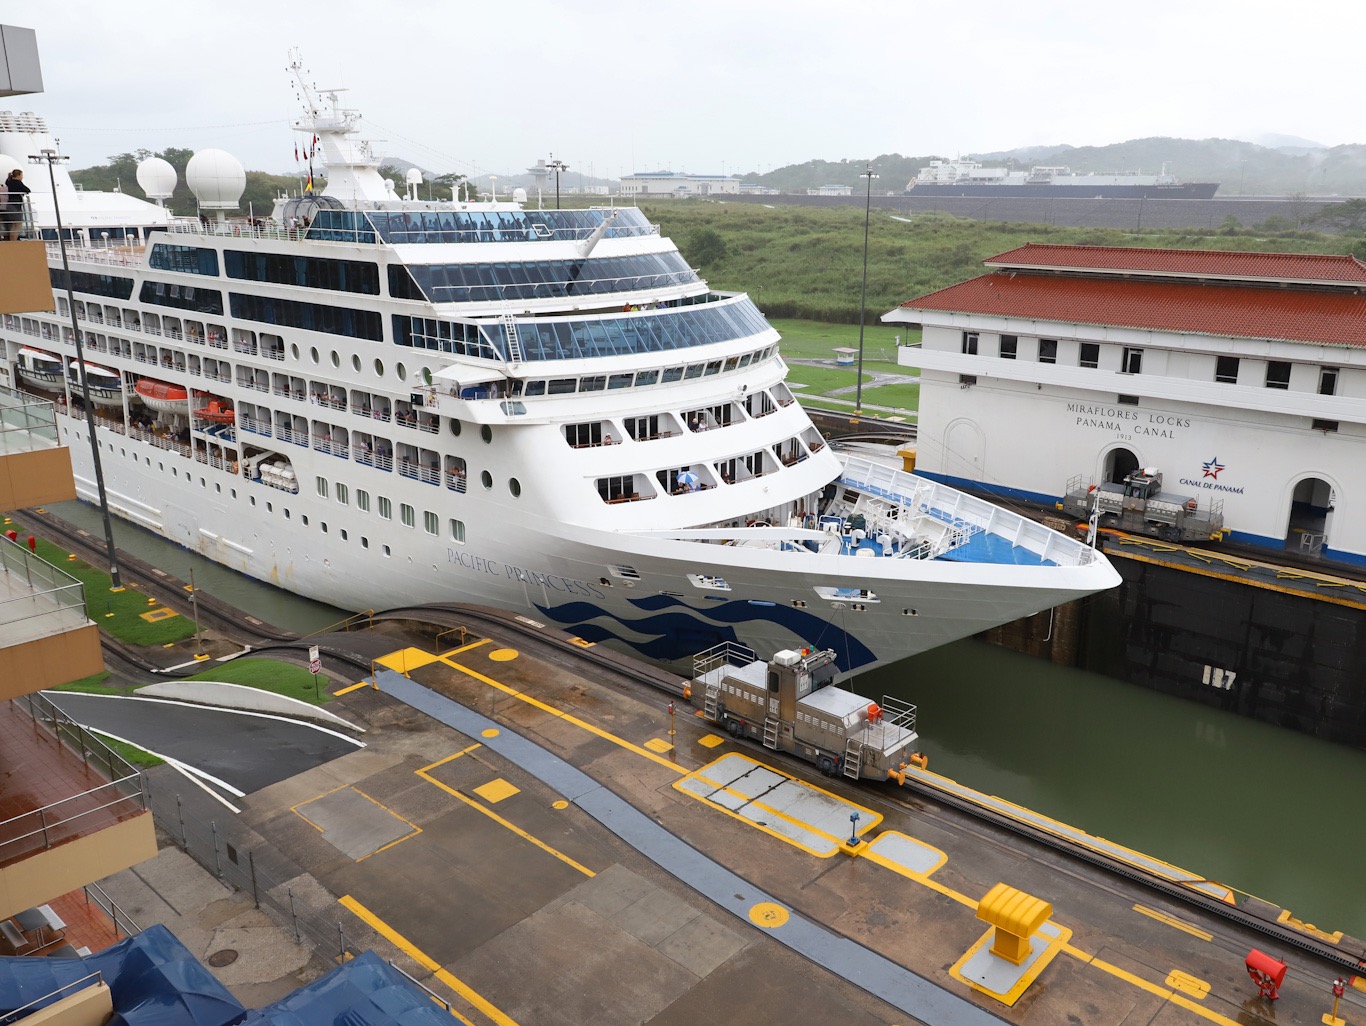 Panama’s Cabinet Council Approves Panama Canal Tolls Structure for Passenger Ships